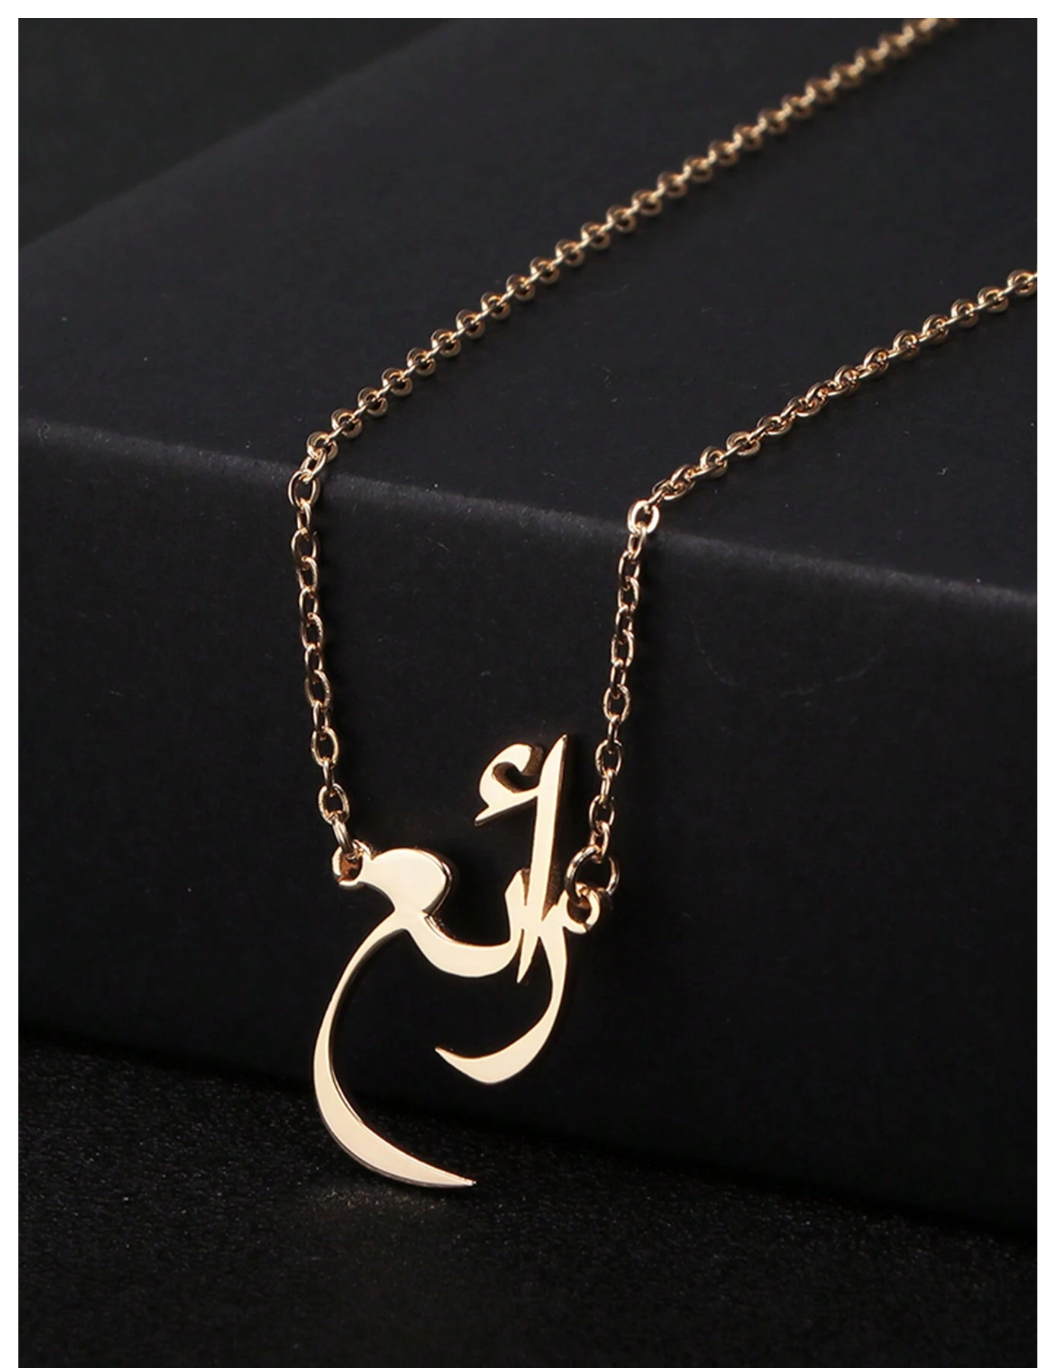 Crafted Elegance: Tailored Arabic Name Necklaces - Perfect for Every Occasion!